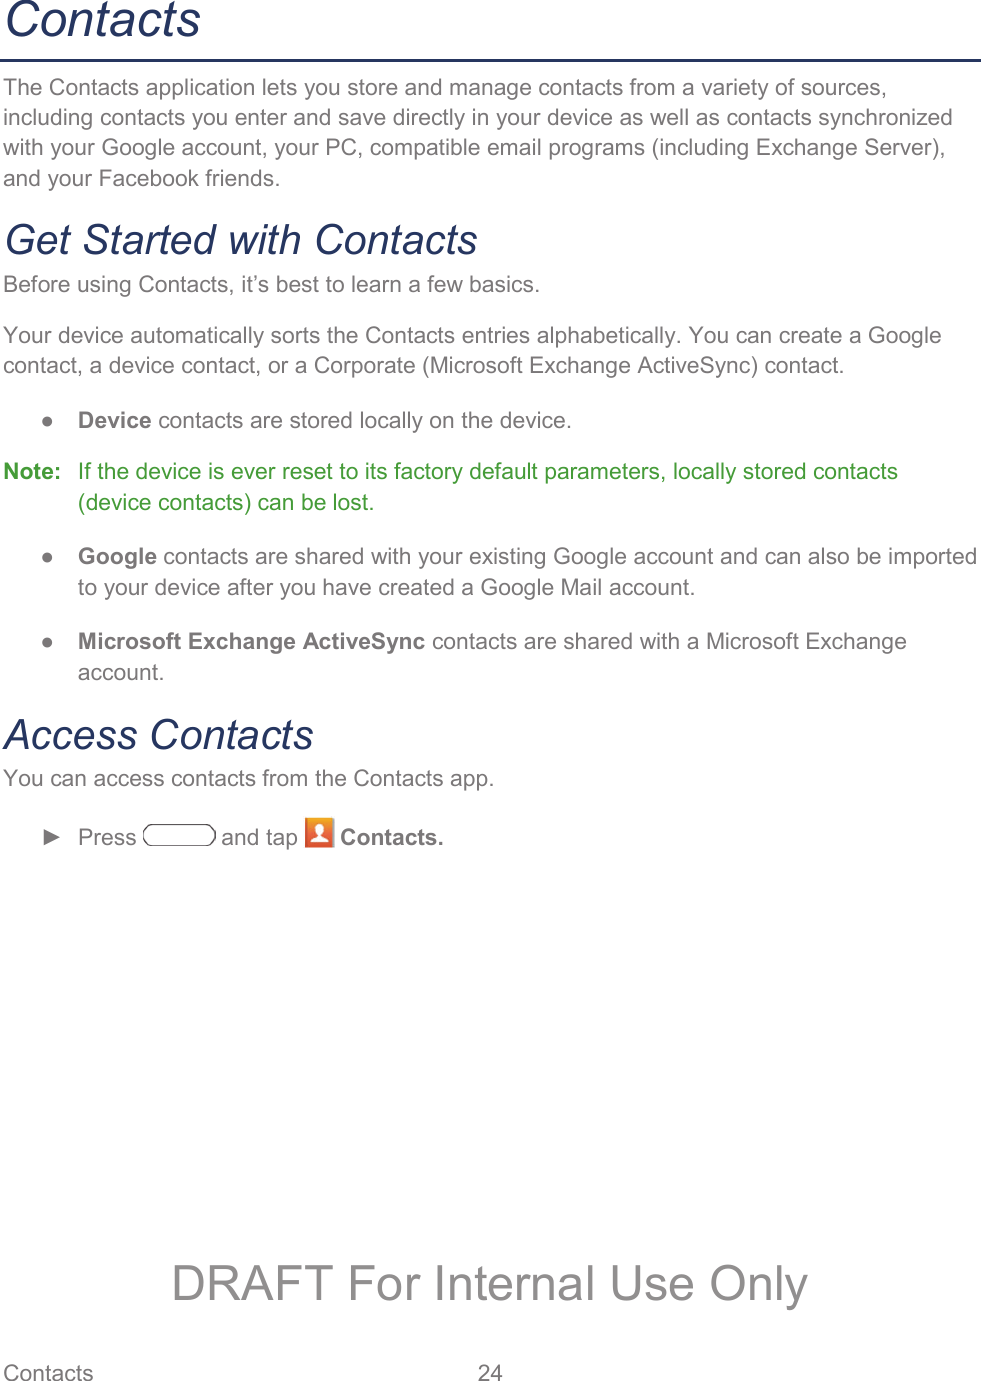 Contacts 24   Contacts The Contacts application lets you store and manage contacts from a variety of sources, including contacts you enter and save directly in your device as well as contacts synchronized with your Google account, your PC, compatible email programs (including Exchange Server), and your Facebook friends. Get Started with Contacts Before using Contacts, it’s best to learn a few basics. Your device automatically sorts the Contacts entries alphabetically. You can create a Google contact, a device contact, or a Corporate (Microsoft Exchange ActiveSync) contact. ● Device contacts are stored locally on the device. Note:   If the device is ever reset to its factory default parameters, locally stored contacts (device contacts) can be lost. ● Google contacts are shared with your existing Google account and can also be imported to your device after you have created a Google Mail account. ● Microsoft Exchange ActiveSync contacts are shared with a Microsoft Exchange account. Access Contacts You can access contacts from the Contacts app. ► Press   and tap   Contacts. DRAFT For Internal Use Only